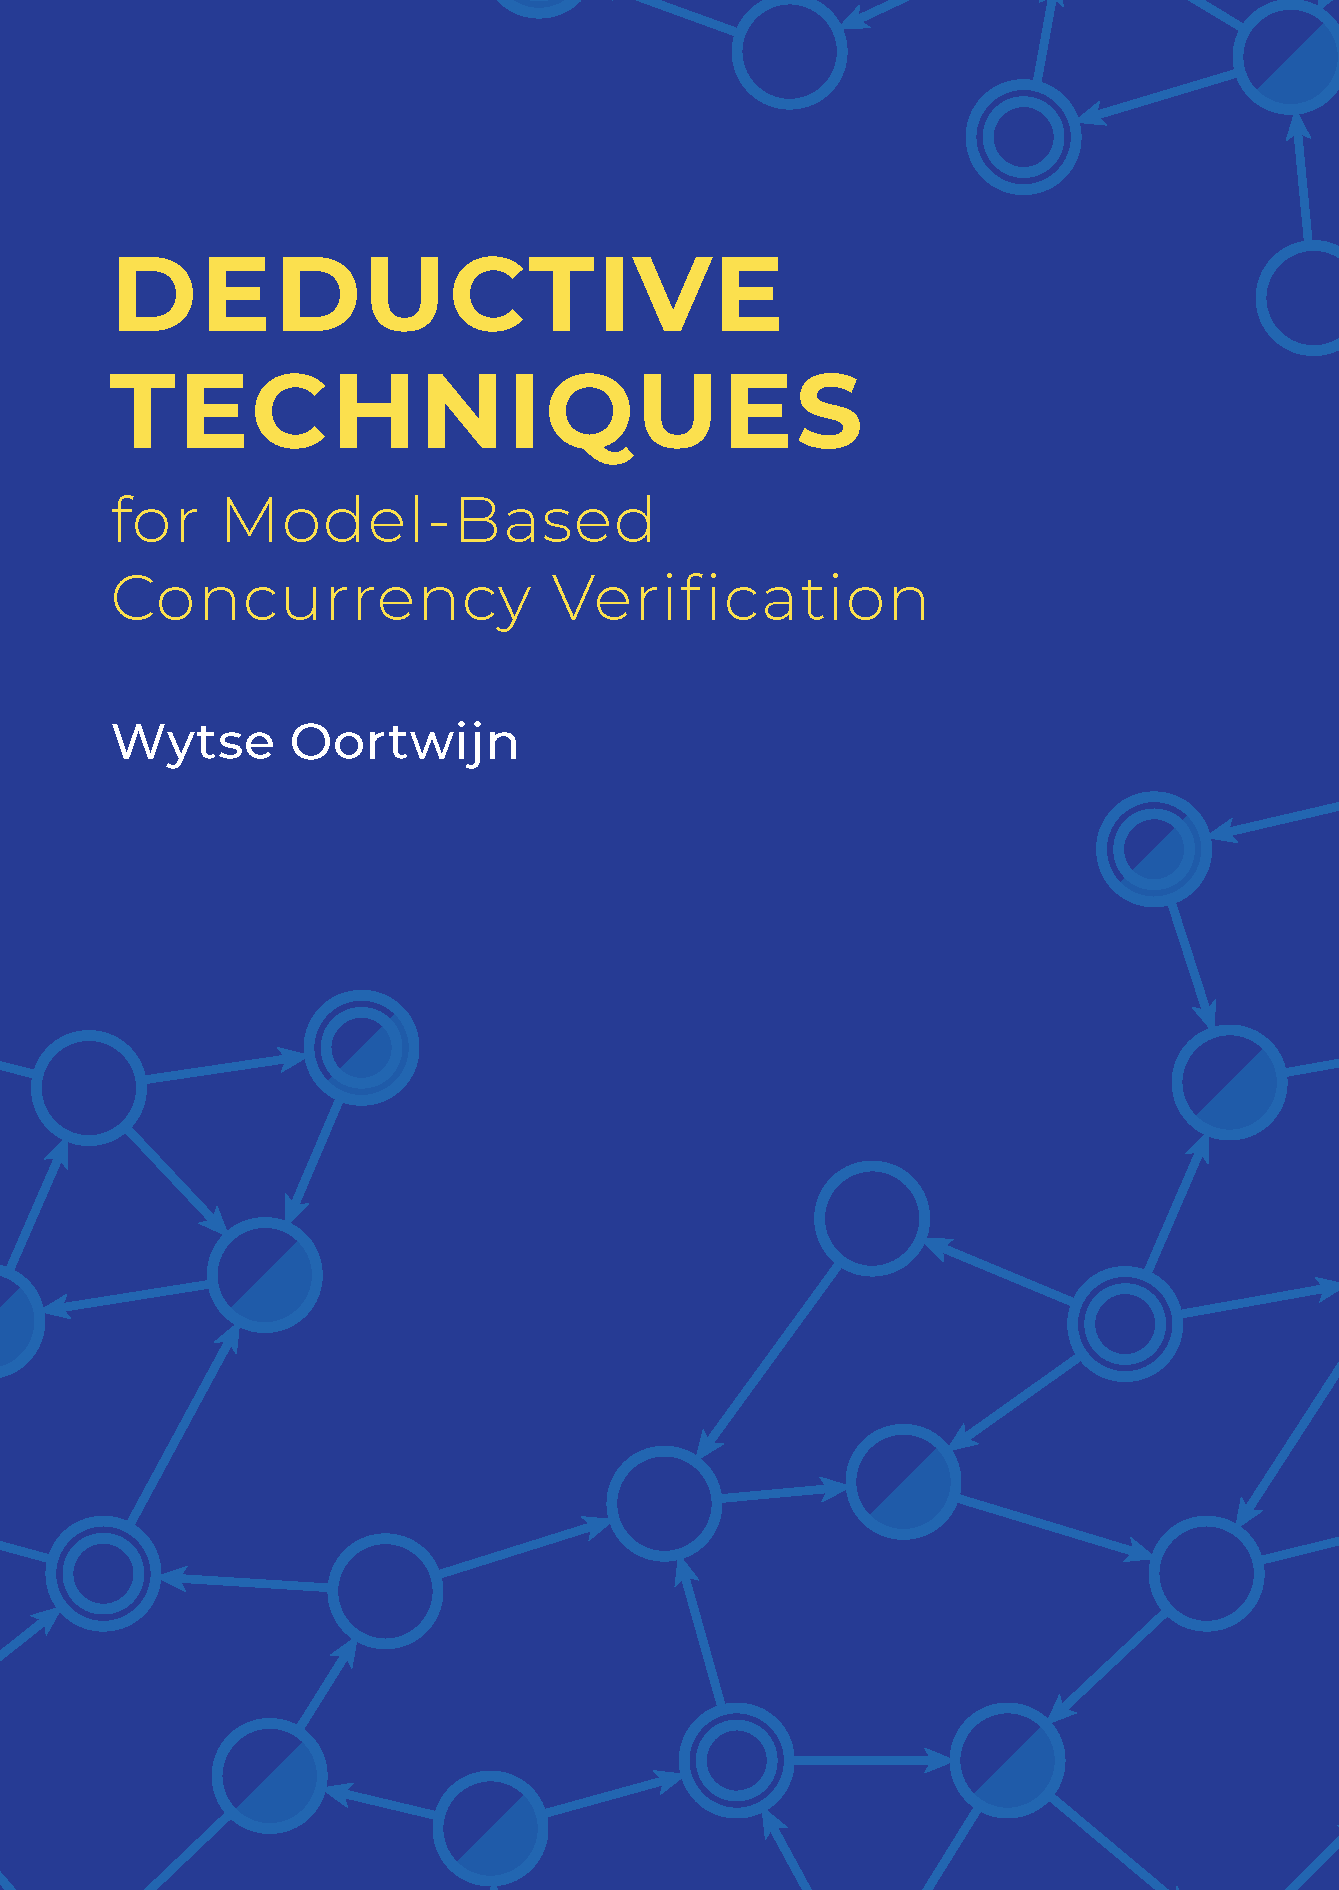 Book cover of Deductive Techniques for Model-Based Concurrency Verification by Wytse Oortwijn